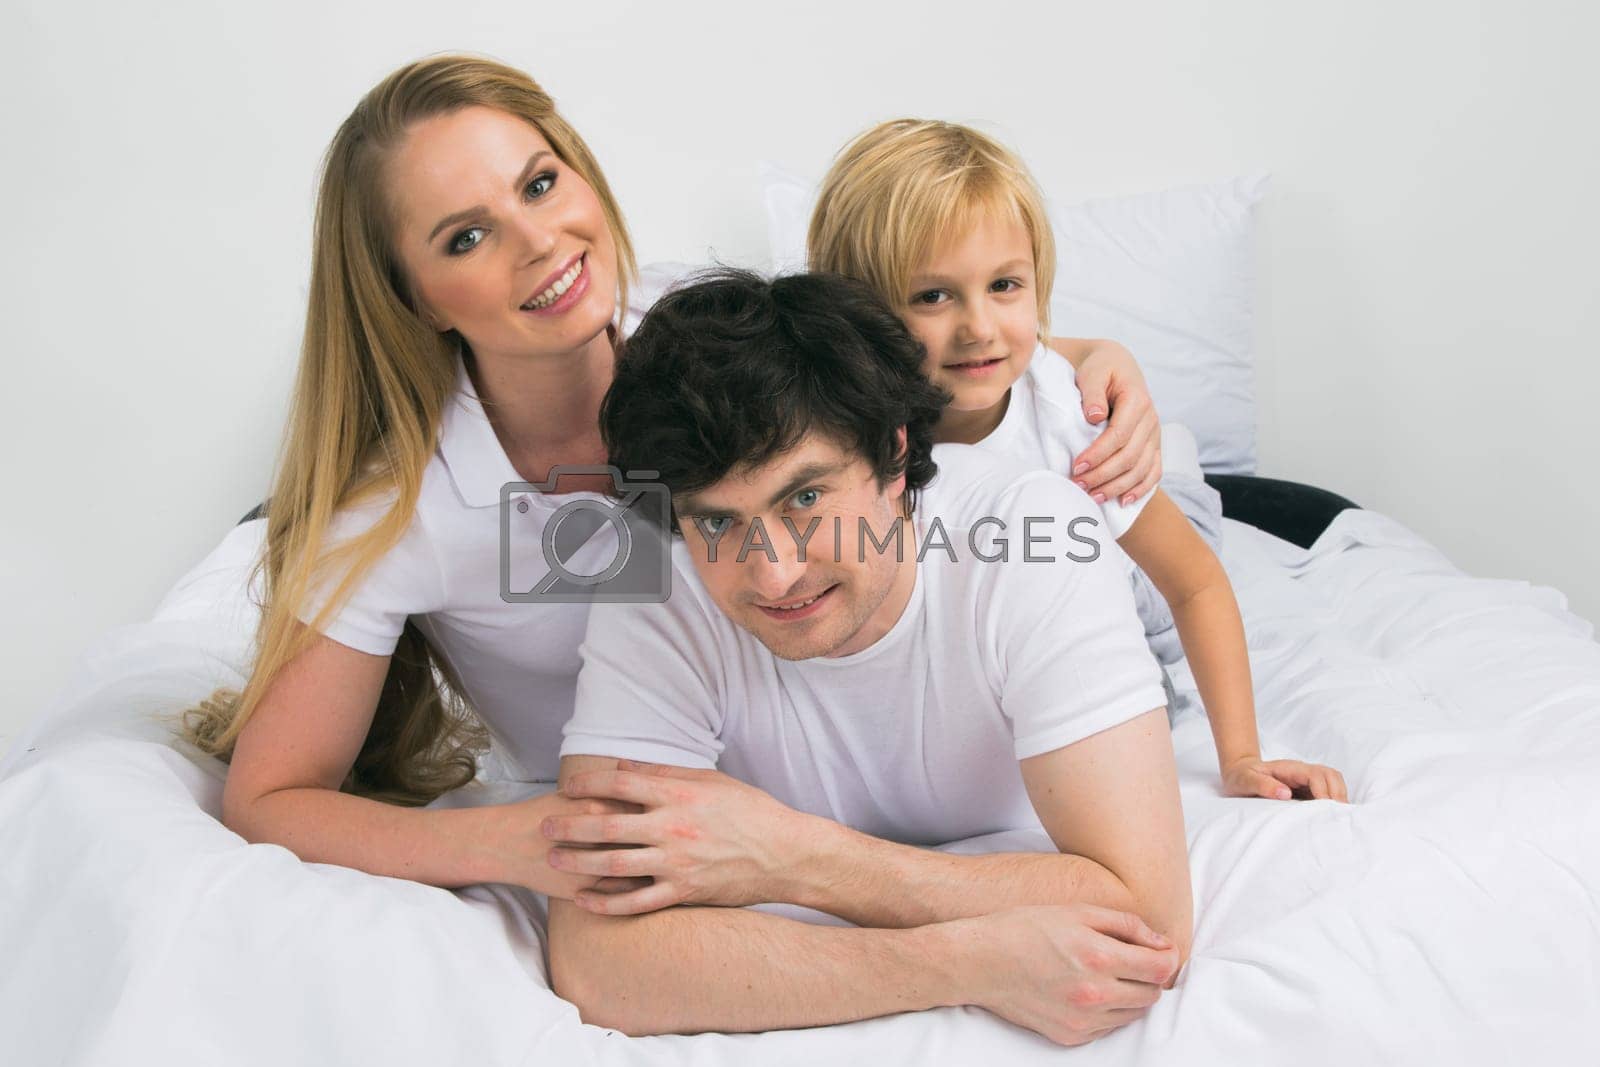 Royalty free image of Smiling family in bed by Yellowj